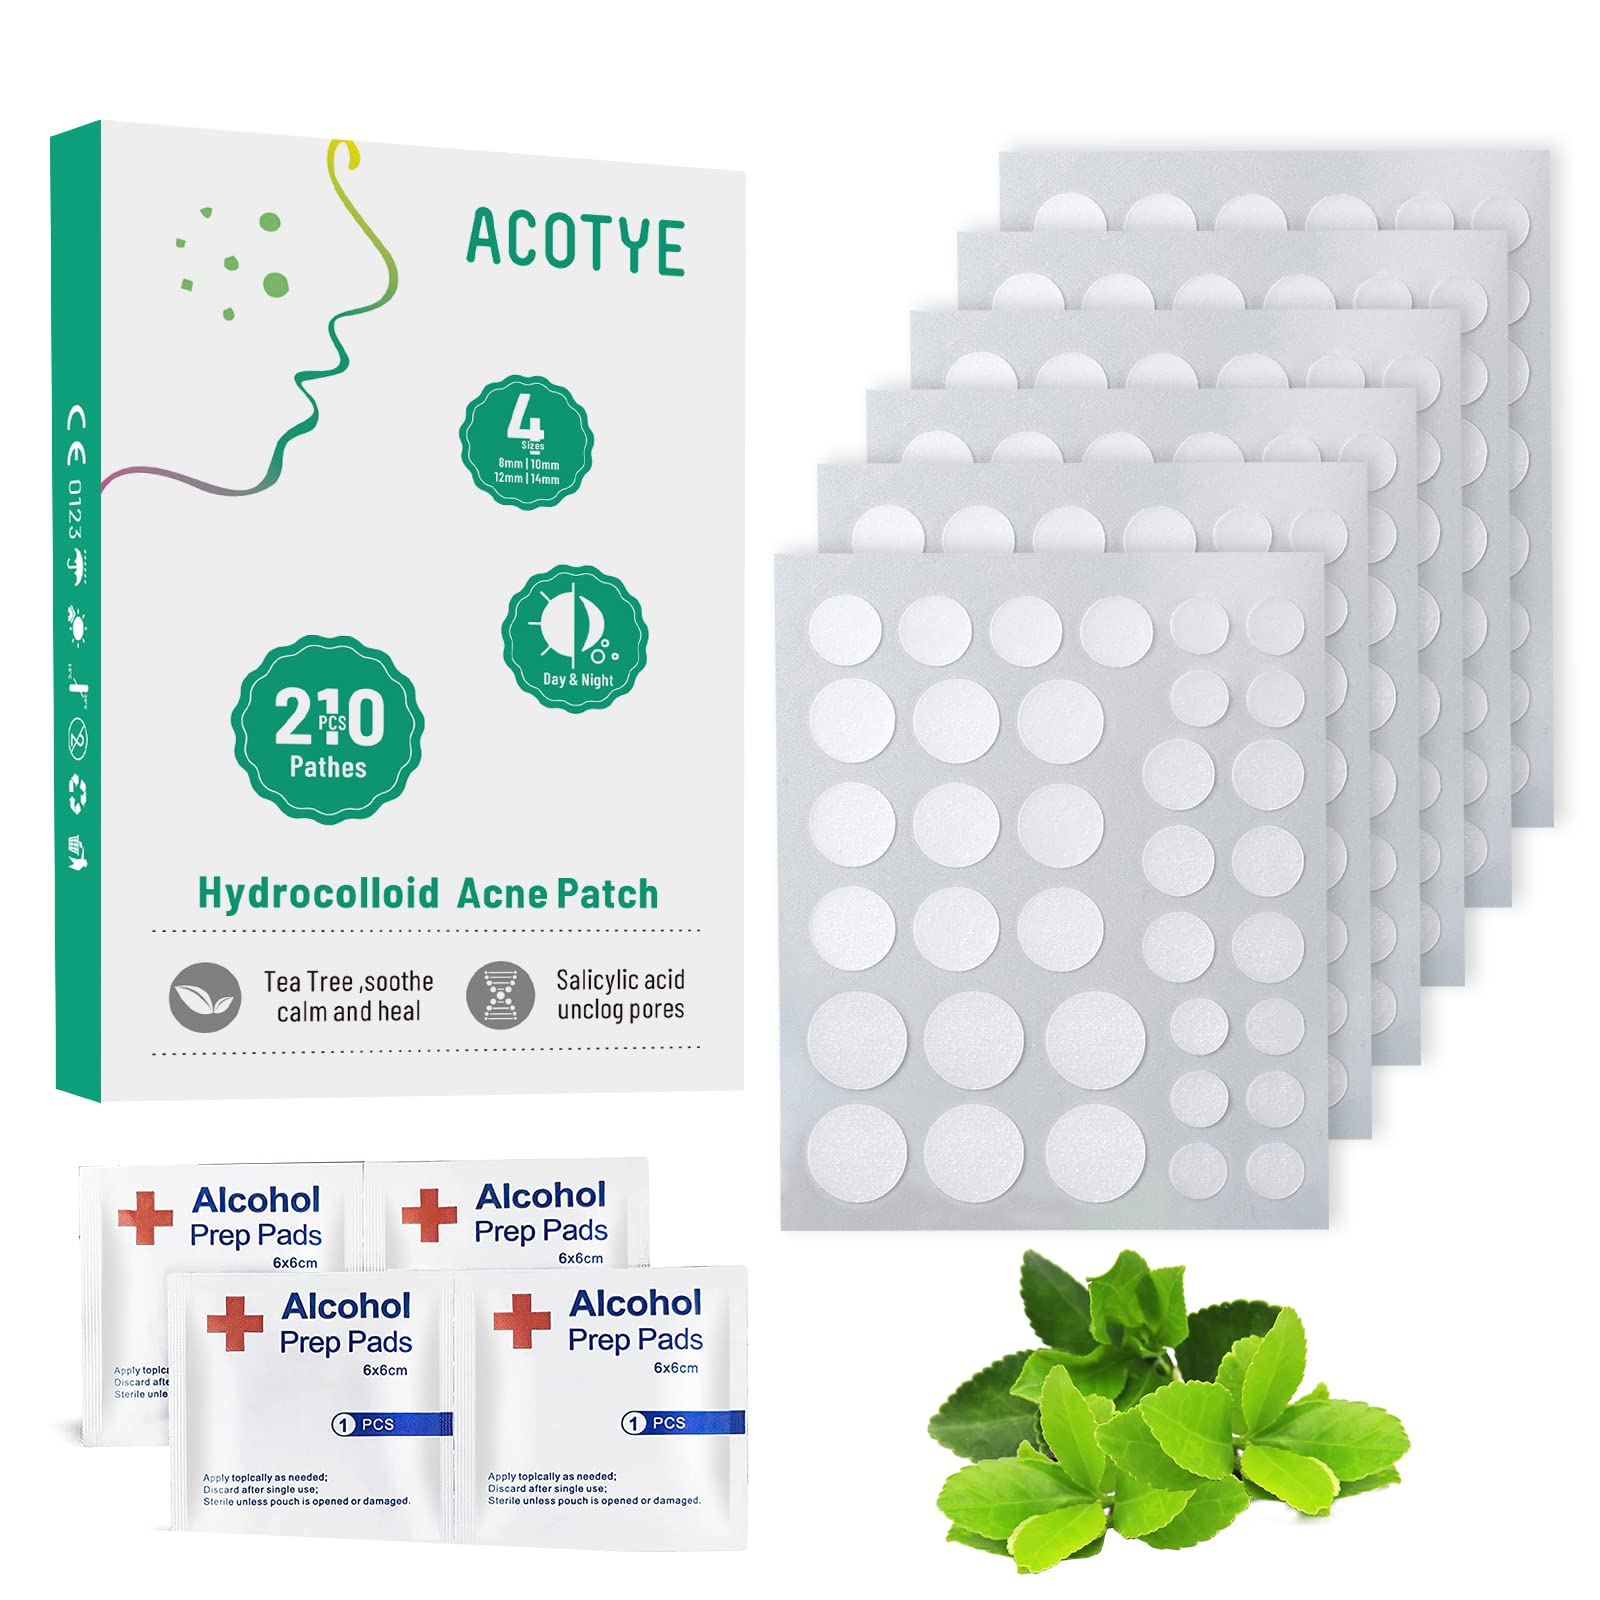 ACOTYE Pimple Patches 210PCS Hydrocolloid Patches Tea Tree Oil, 0.7% Salicylic Acid and Niacinamide, Blemish Spot, Invisible Spot Patches, 4 Sizes 8mm, 10mm, 12mm,14mm